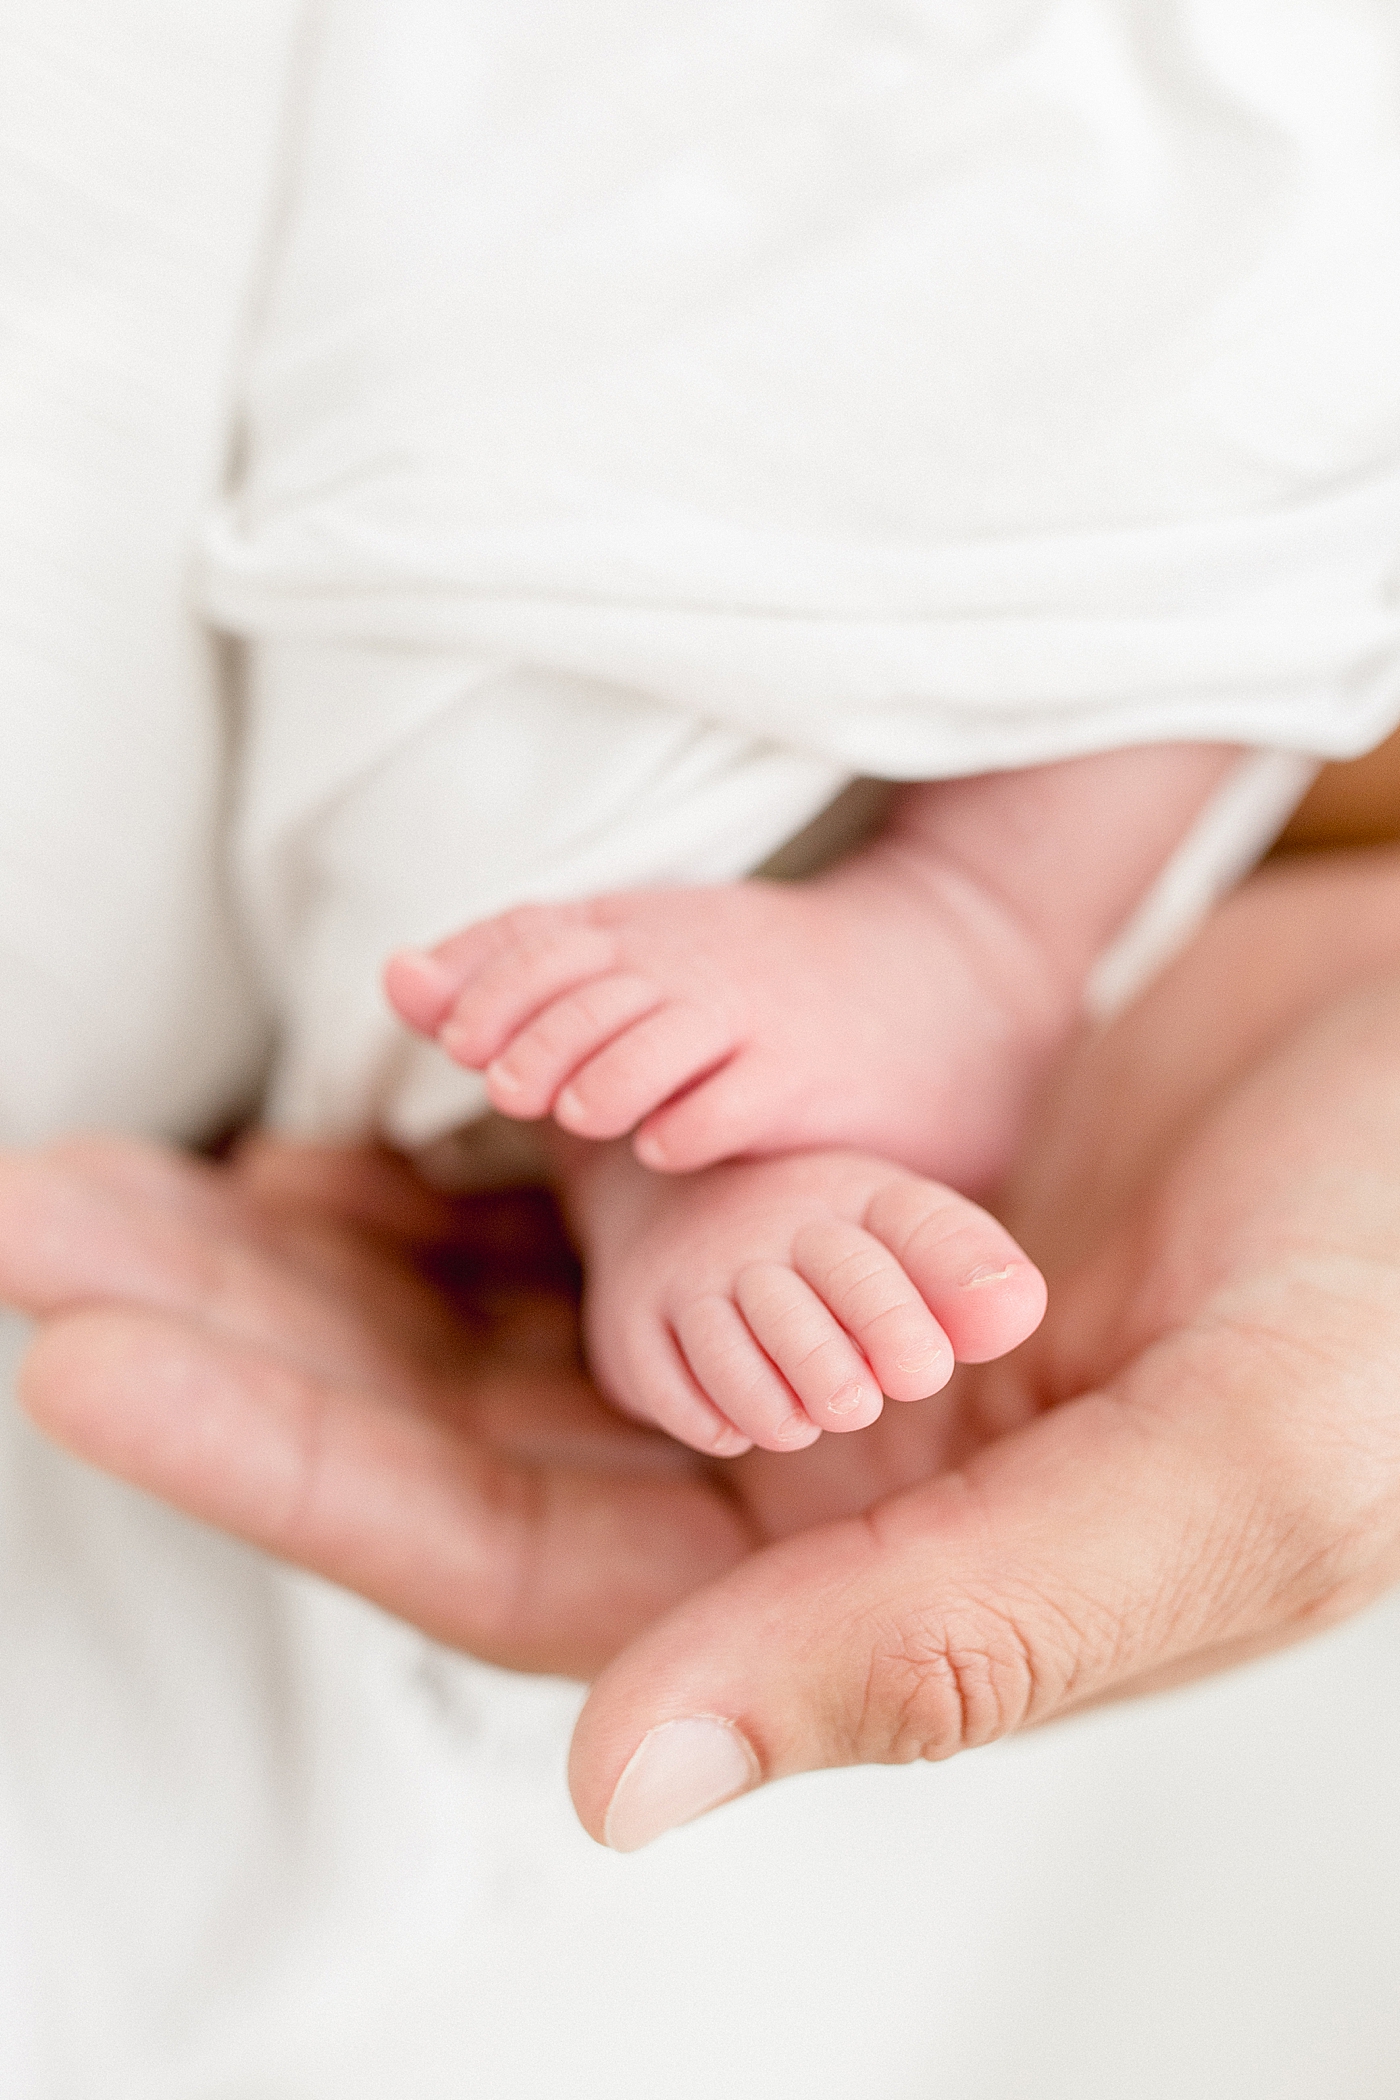 Tiny baby feet in the palm of Dad's hands. Photo by Brittany Elise Photography.